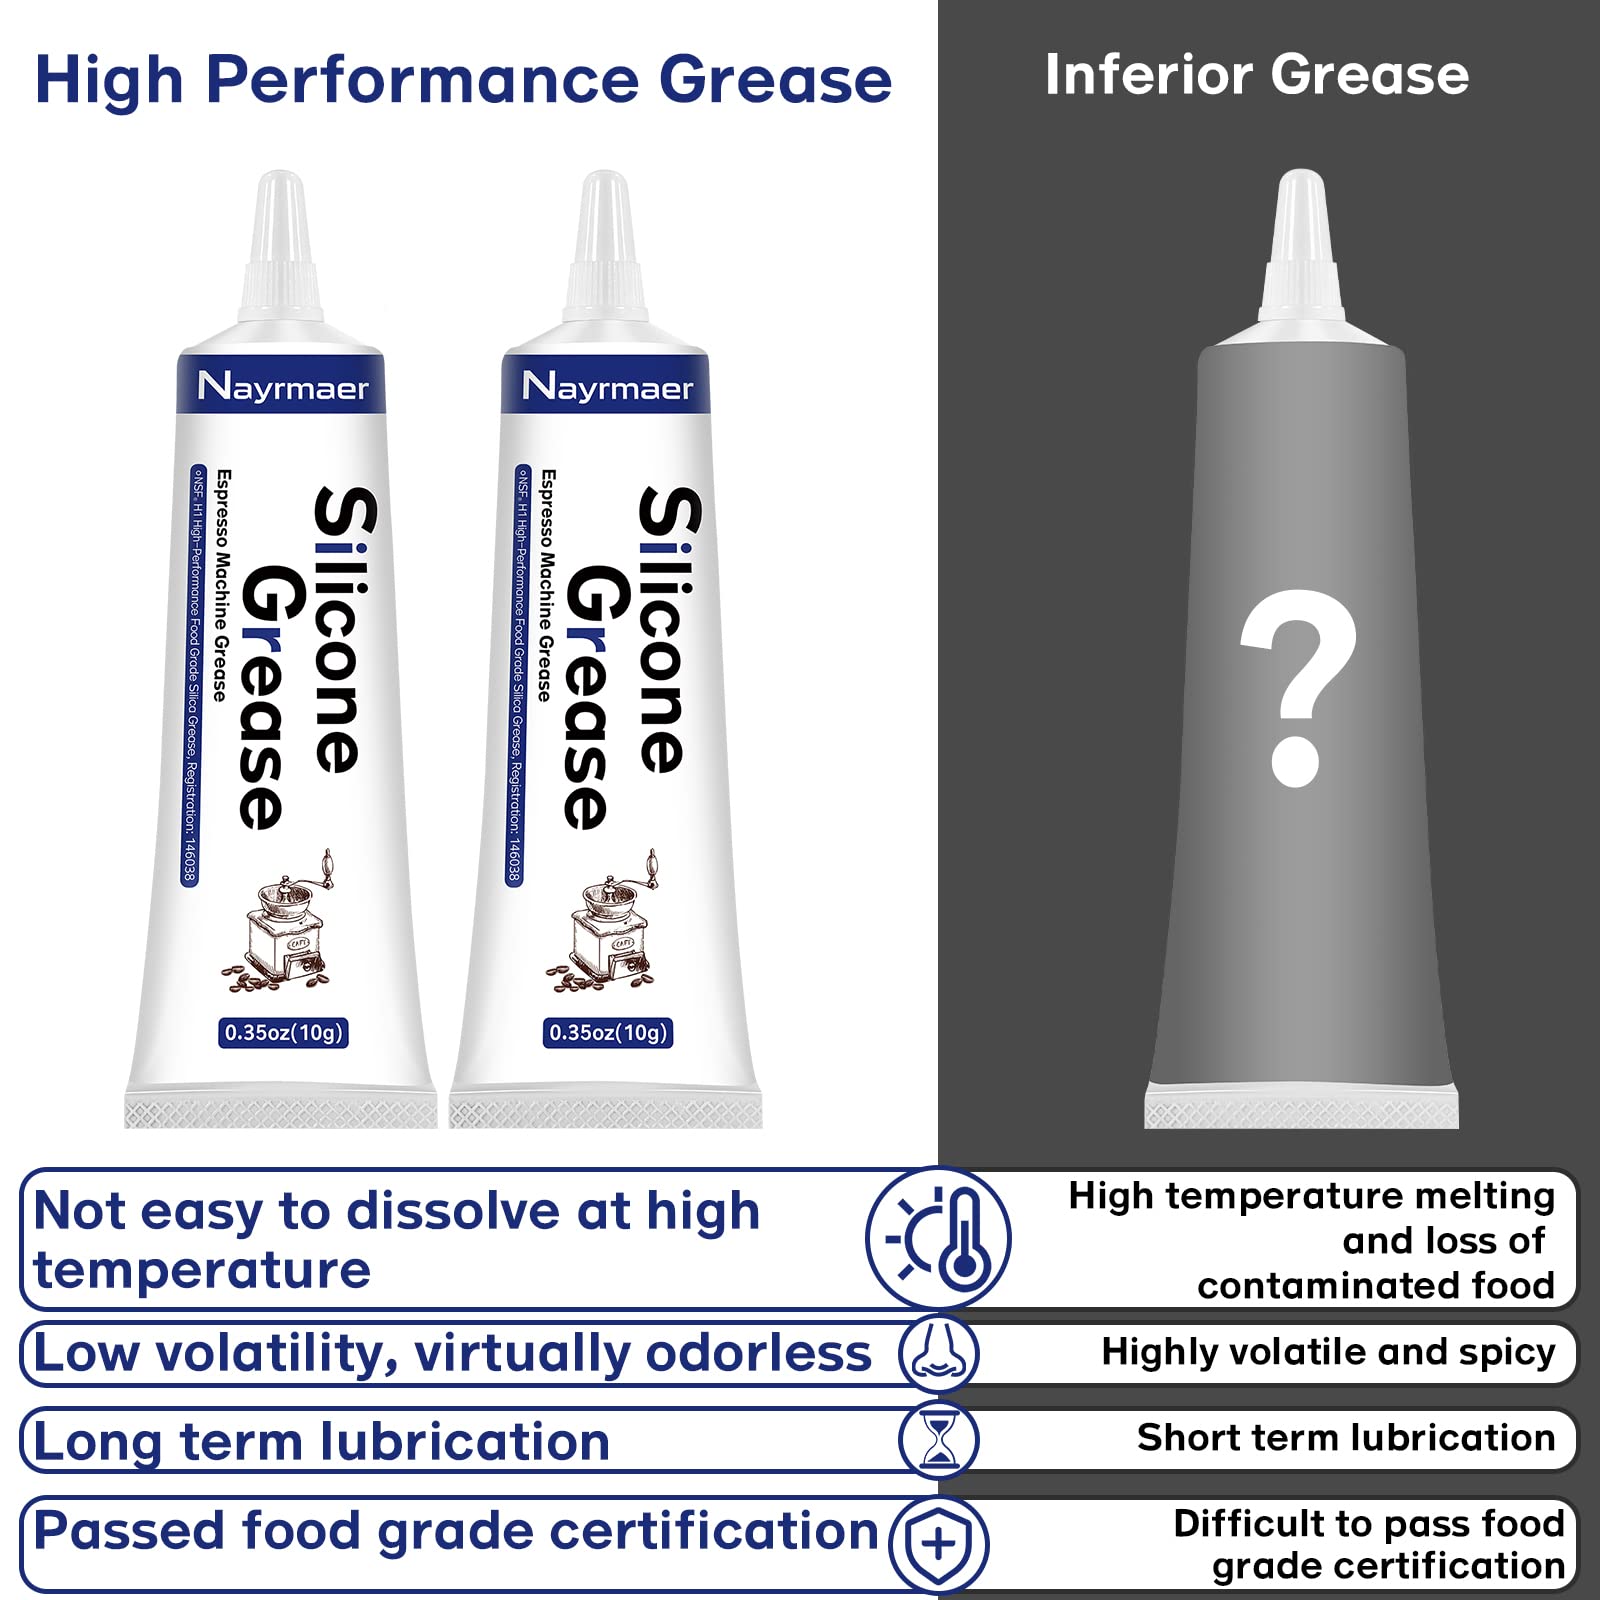 Espresso Machine Grease, 2 x 10g Silicone Grease Maintenance Kit for Care and Maintenance of All Coffee Machines, Food Grade Grease for All Expresso Machines